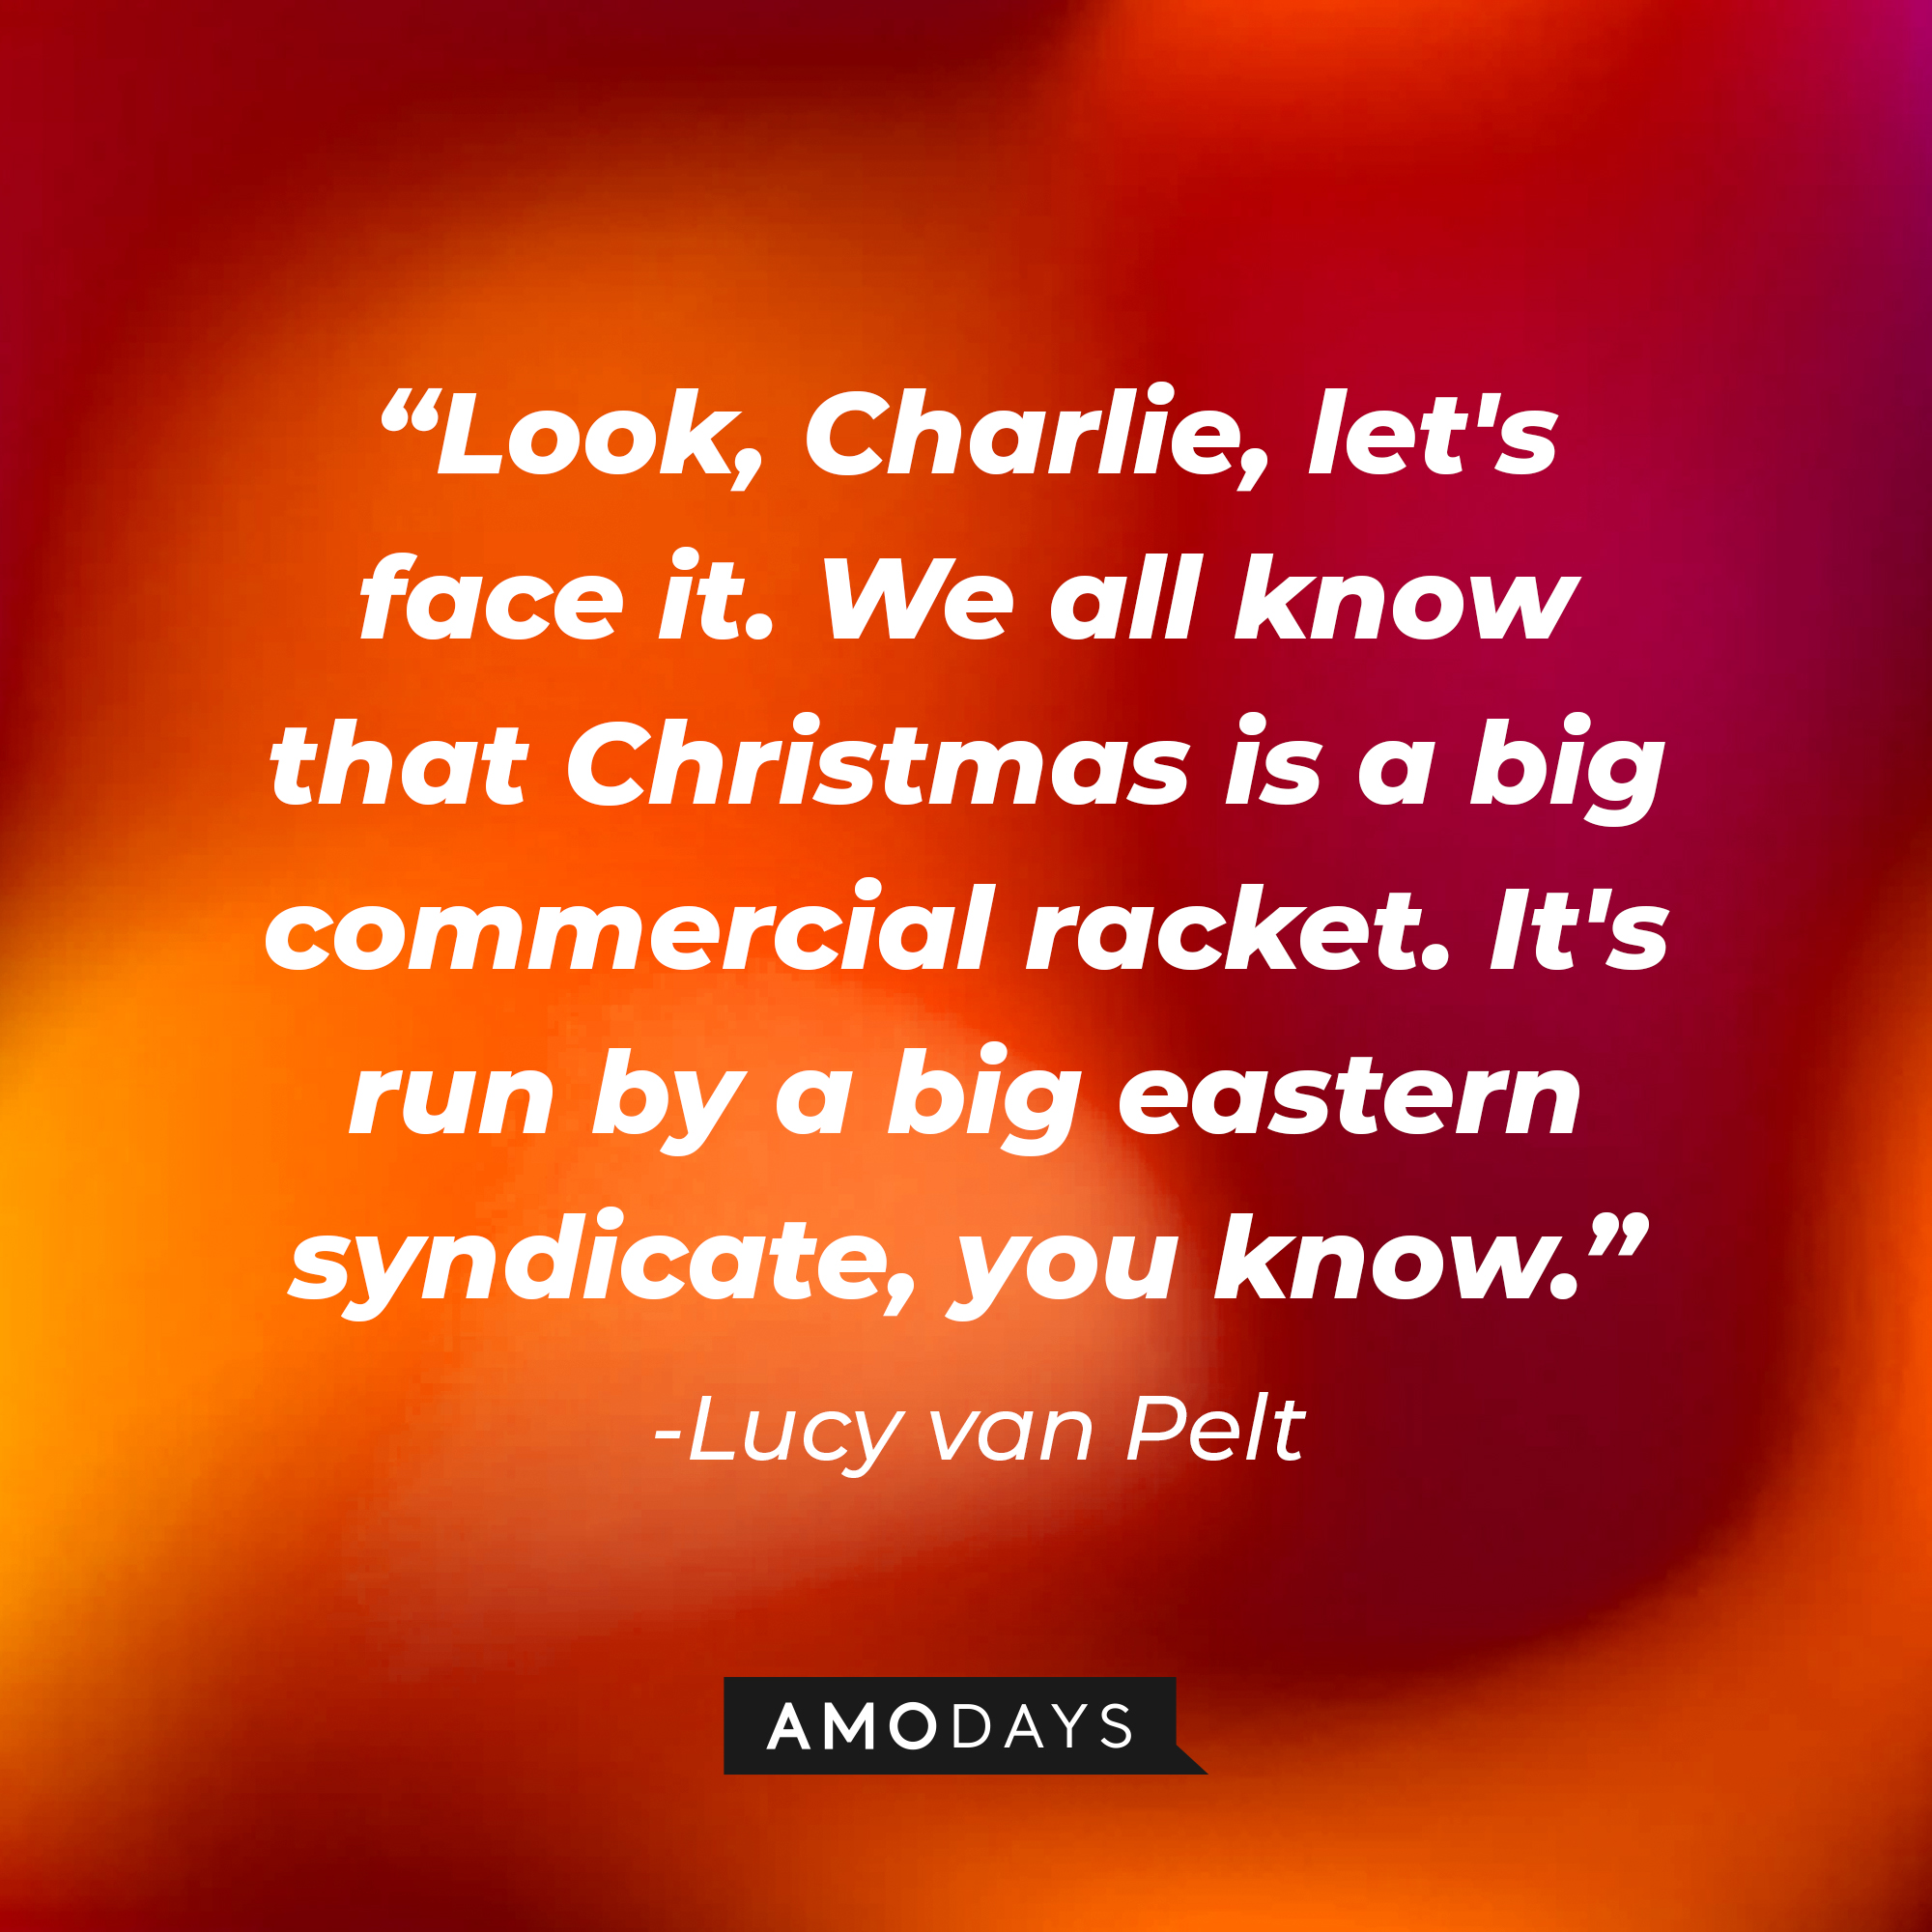 Lucy Van Pelt's quote:  "Look, Charlie, let's face it. We all know that Christmas is a big commercial racket. It's run by a big eastern syndicate, you know." | Source: Amodays